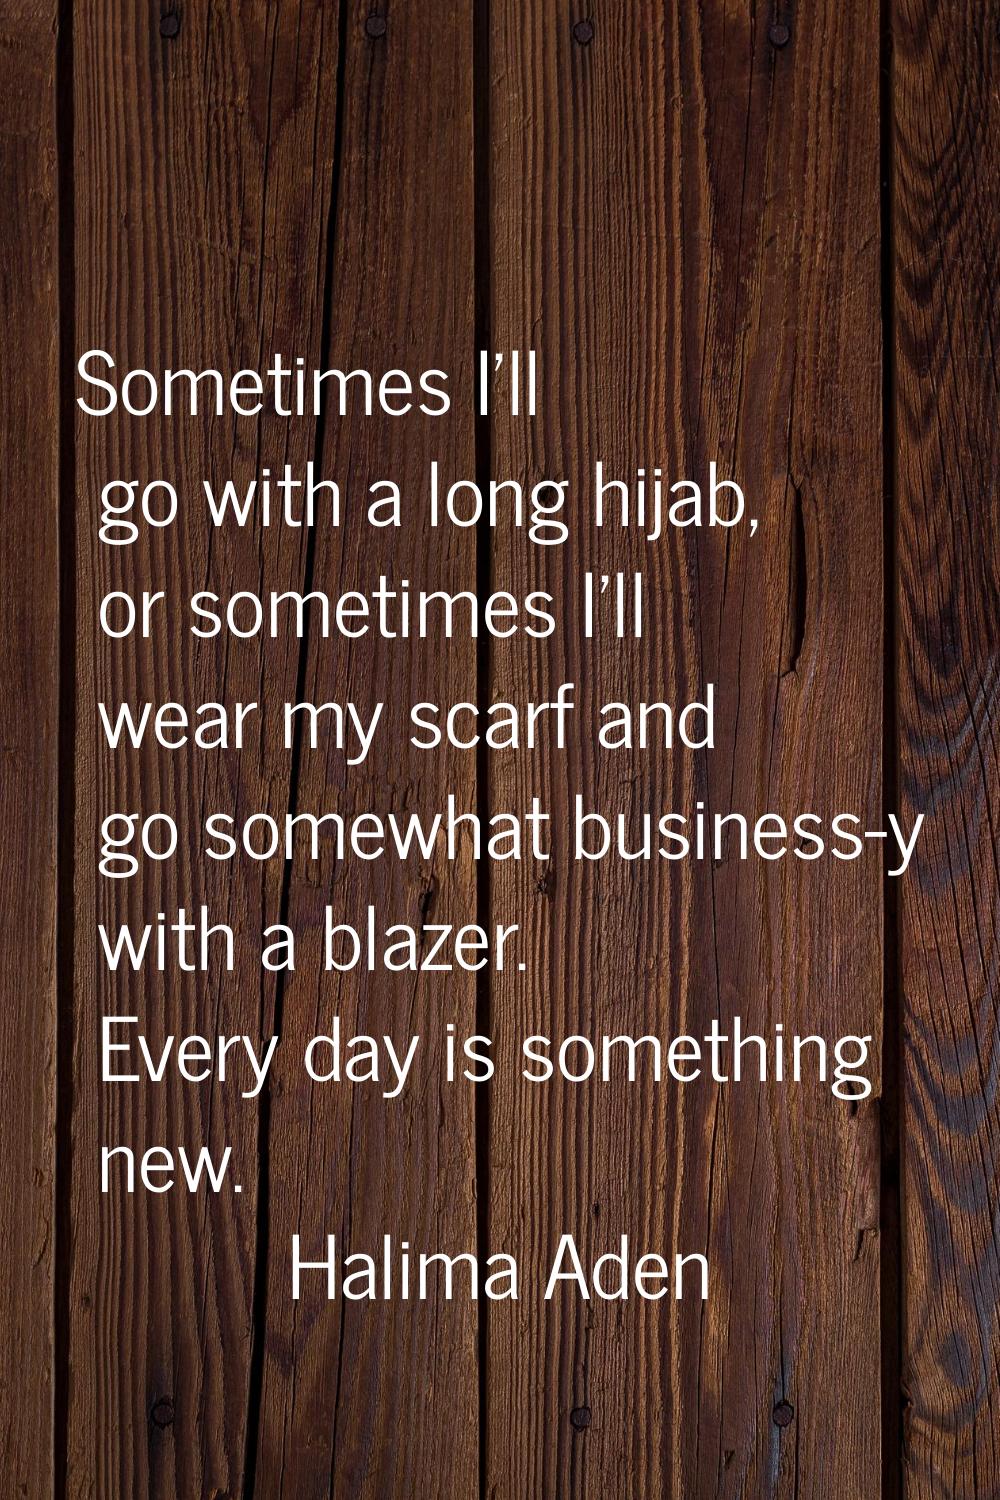 Sometimes I'll go with a long hijab, or sometimes I'll wear my scarf and go somewhat business-y wit